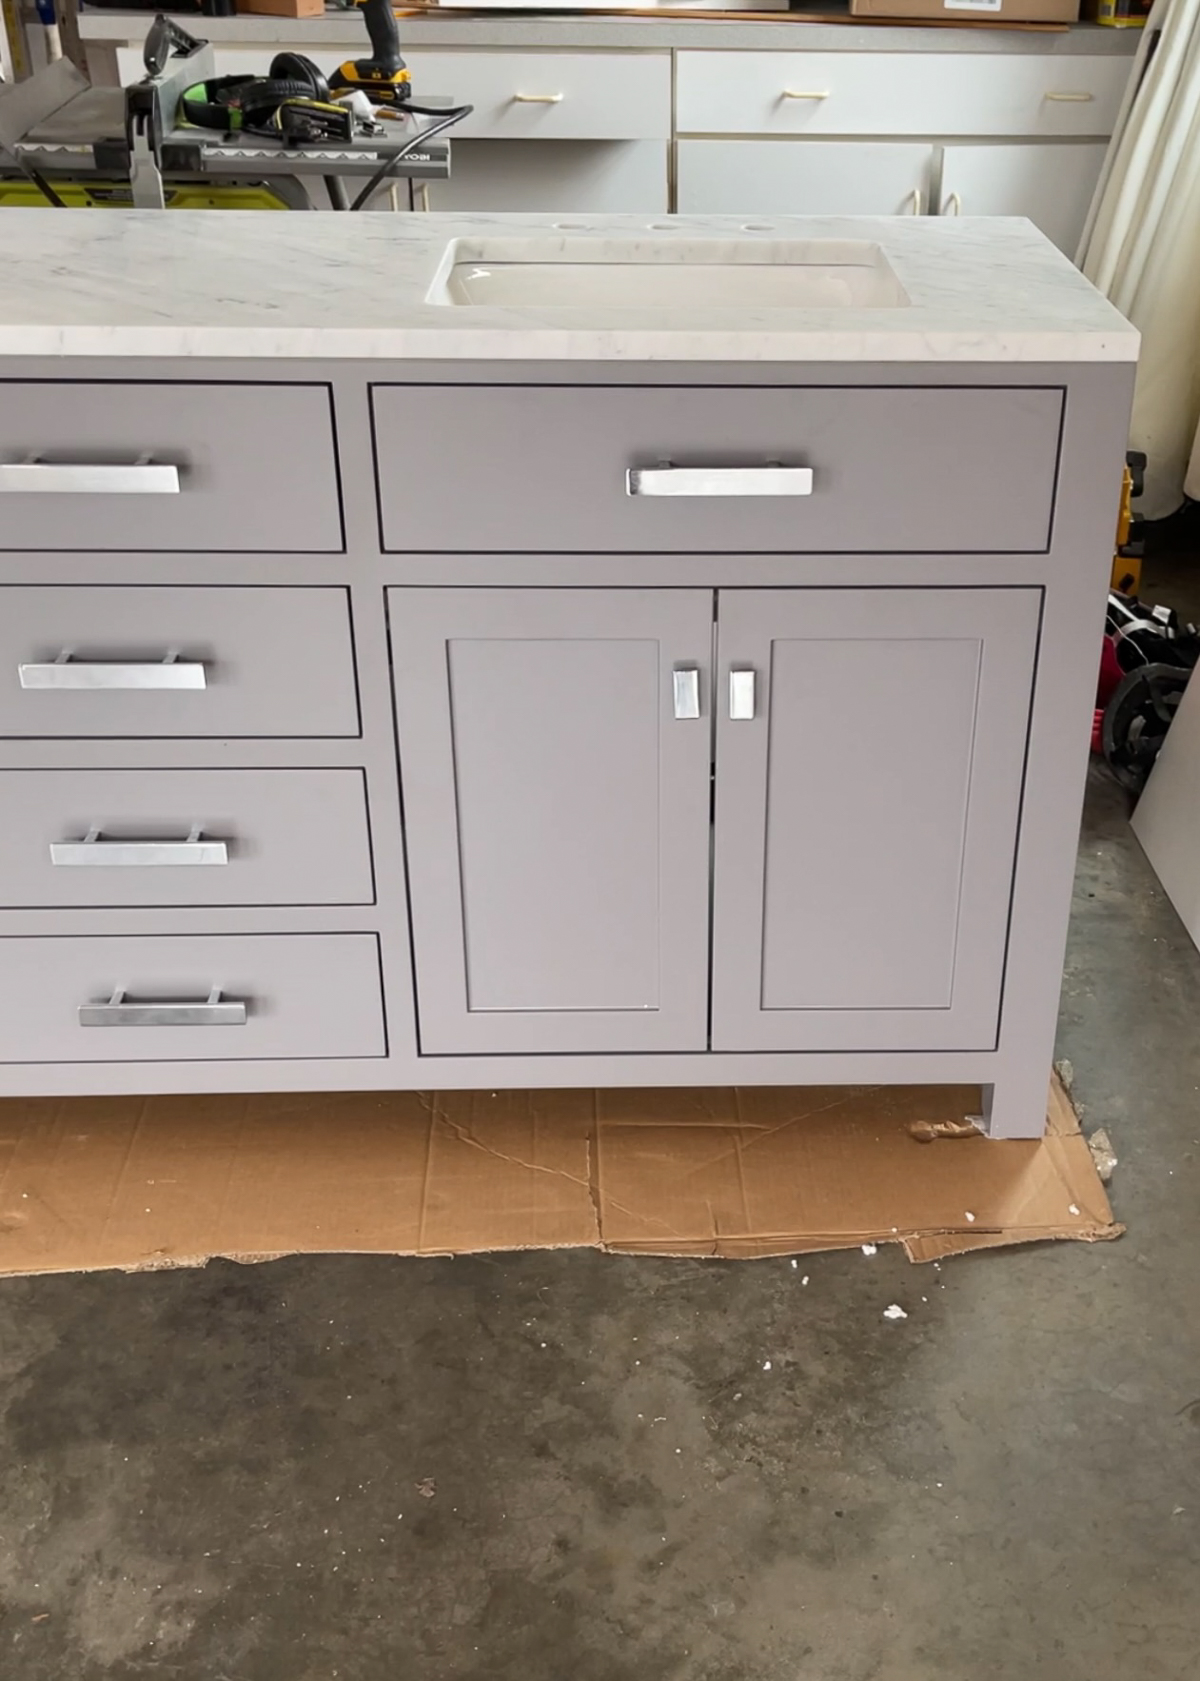 Grey bathroom vanity with chrome cabinet knobs and drawer pulls, marble countertop